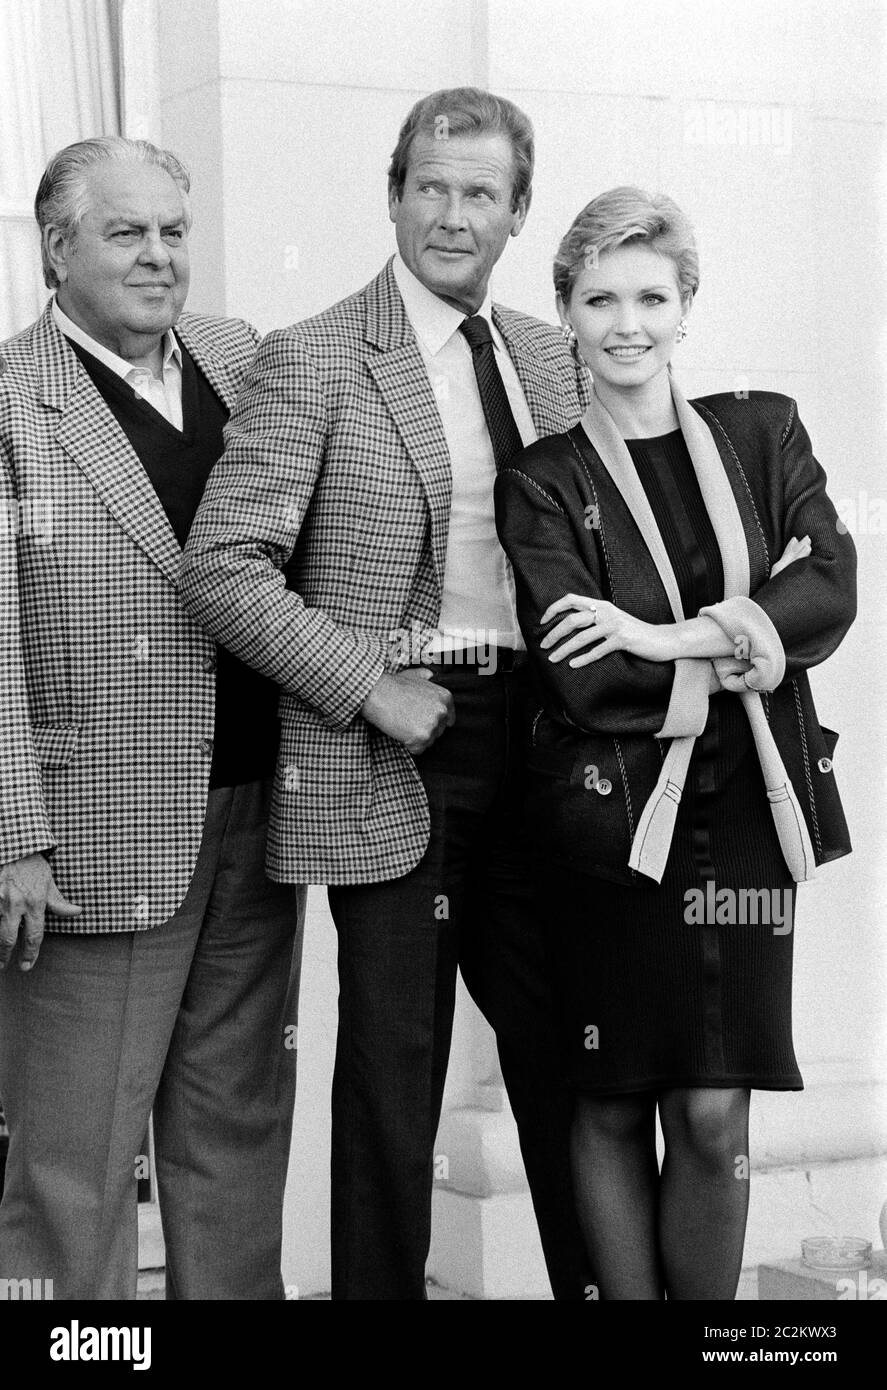 DEAUVILLE, FRANCE. Sept 1985: Actors Roger Moore & Fiona Fullerton & producer Albert R. Broccoli promoting their movie 'A View to a Kill' at the Deauville Film Festival. © Paul Smith/Featureflash Stock Photo